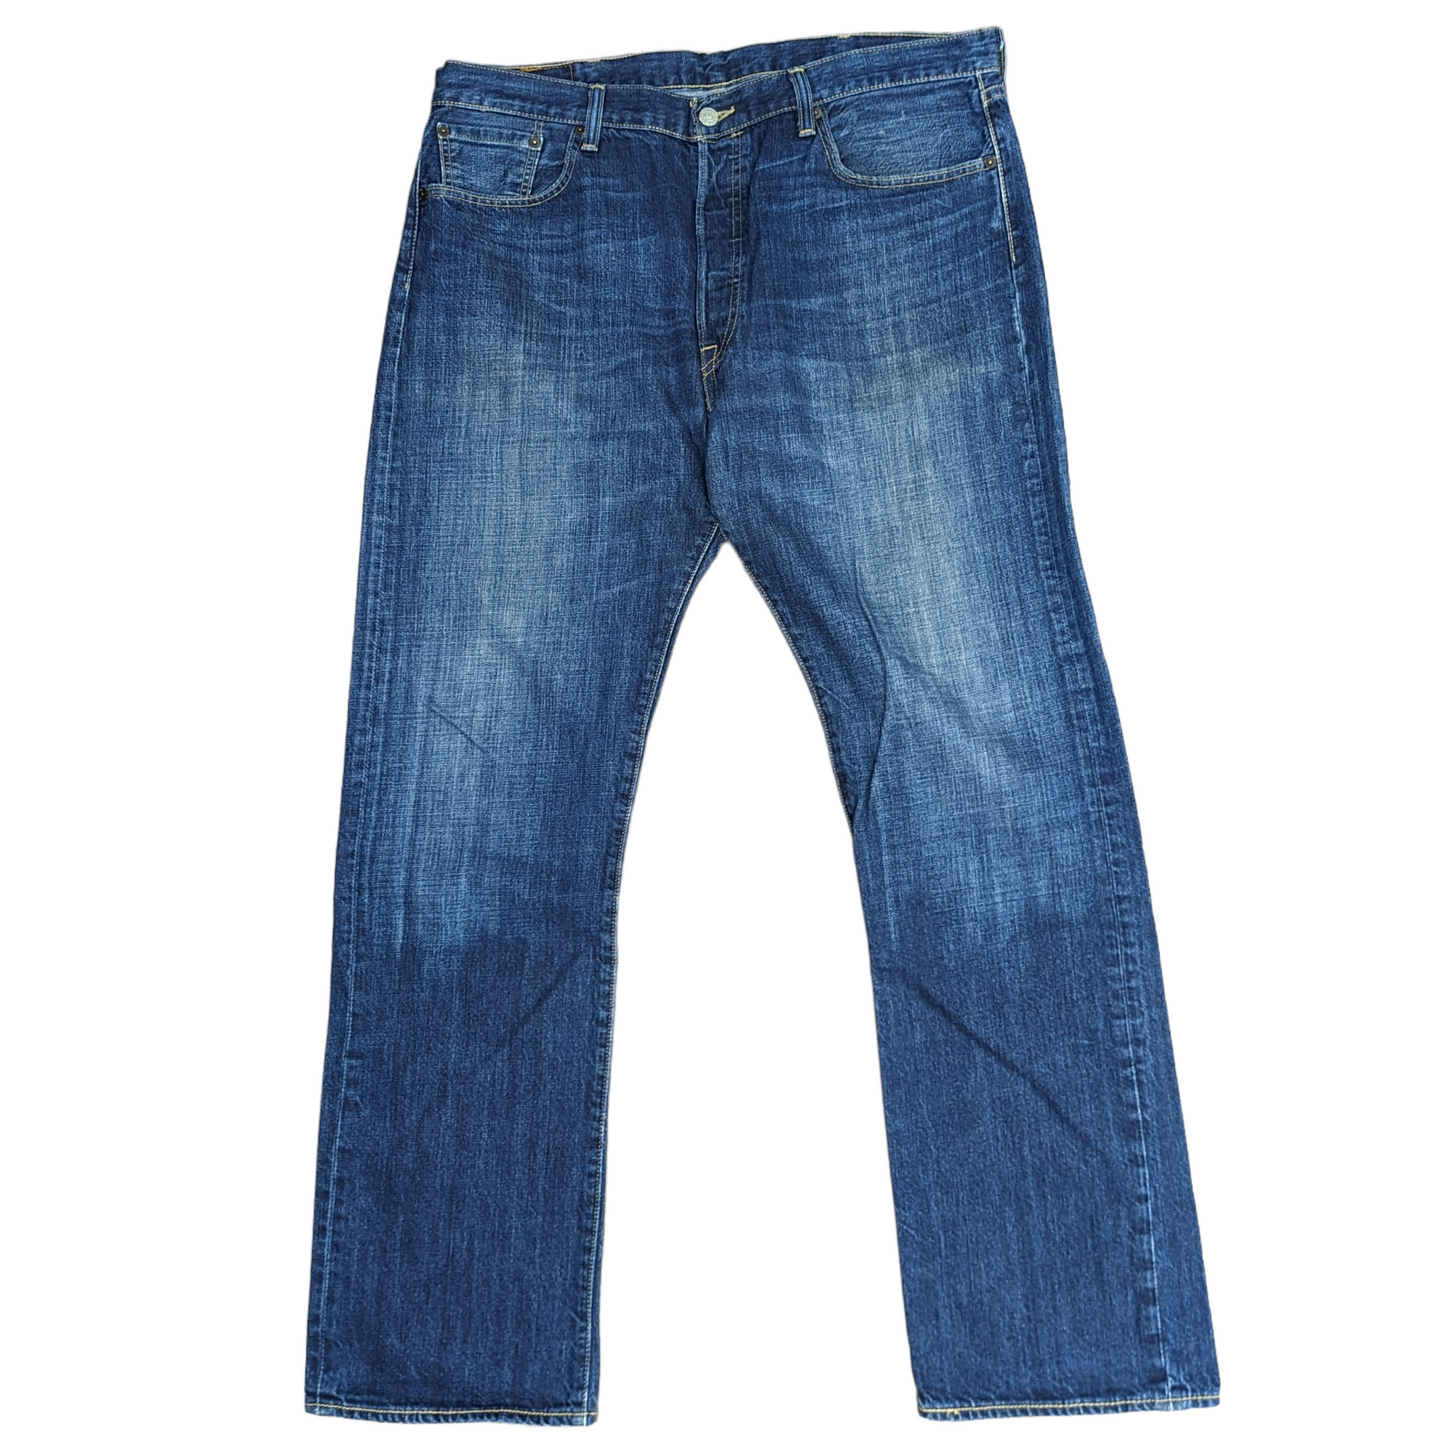 Levi’s 501 Straight Fit Jeans In Blue W38 L32